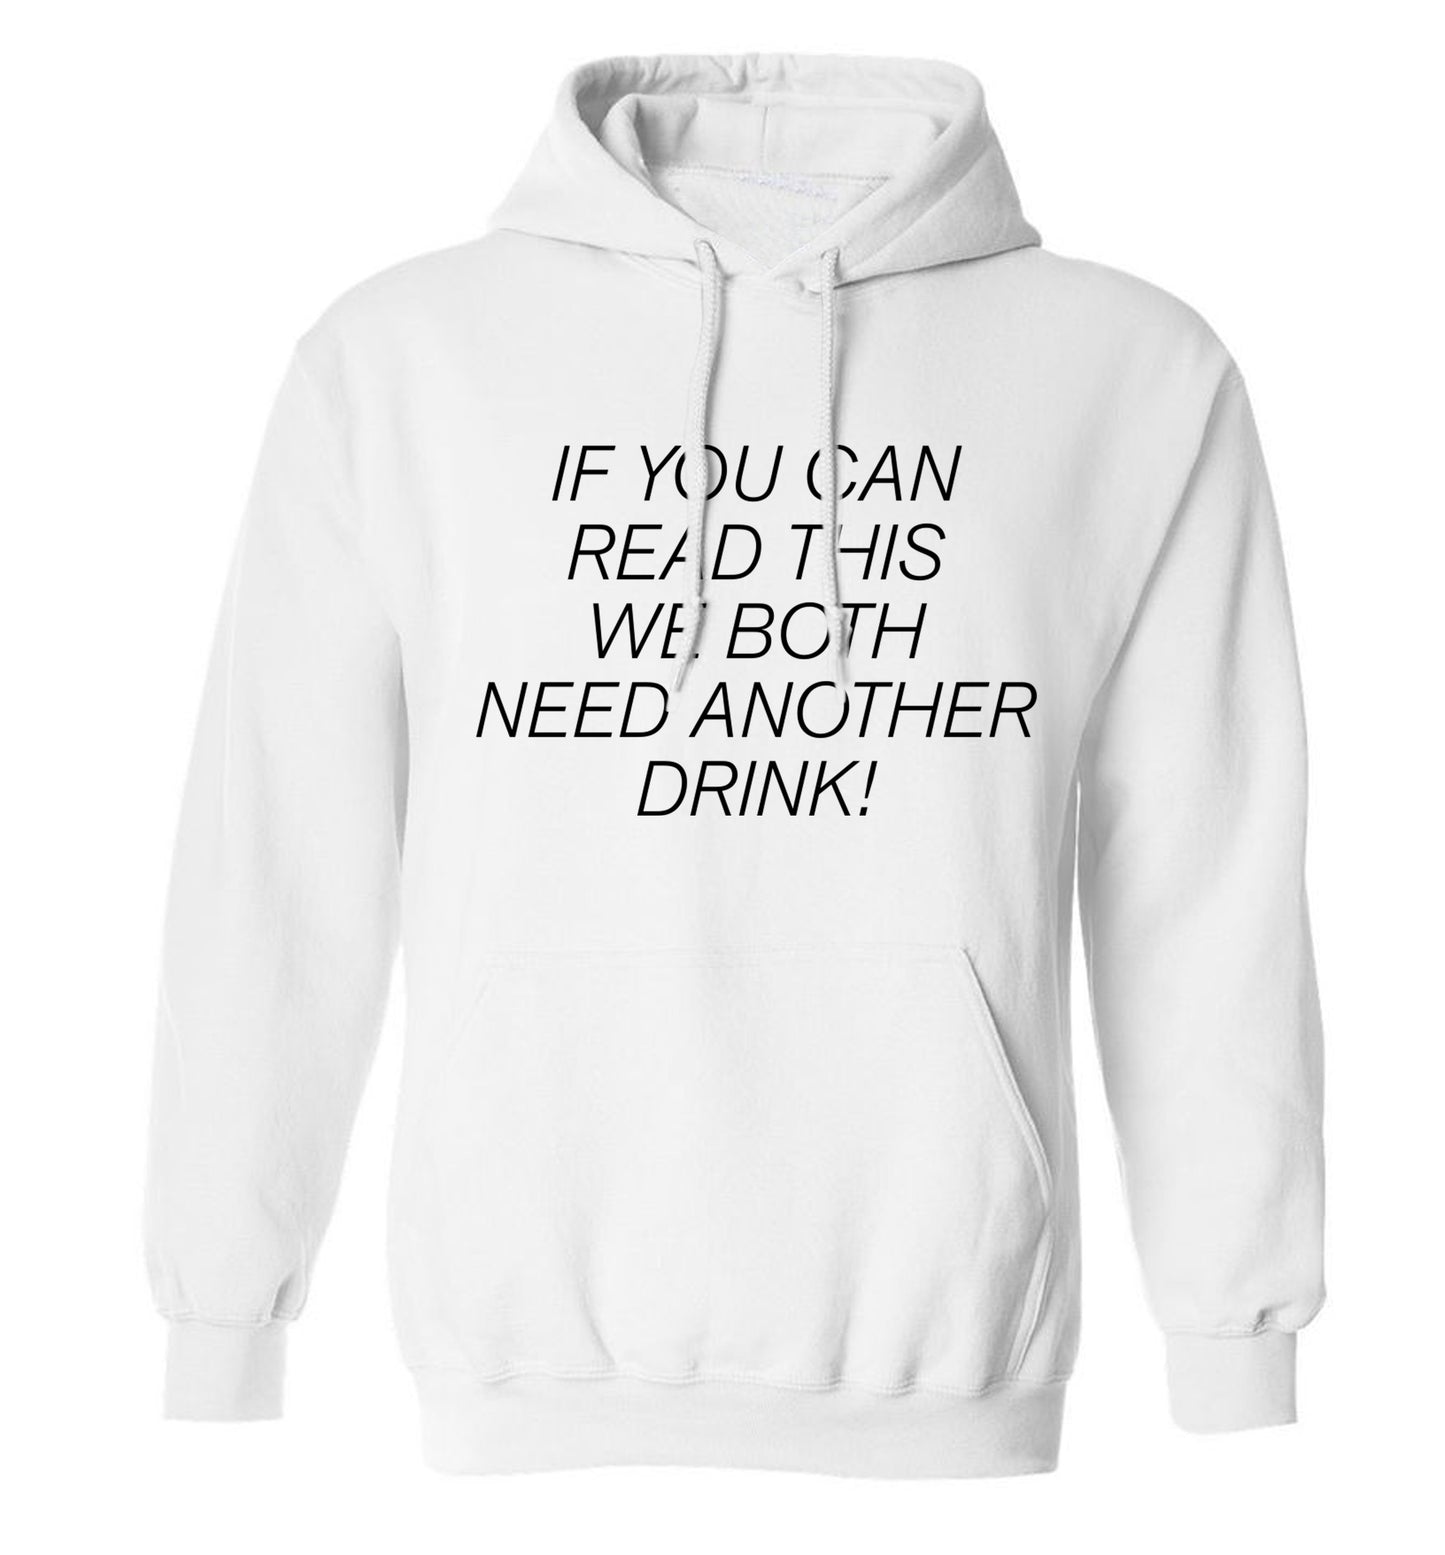 If you can read this we both need another drink! adults unisex white hoodie 2XL